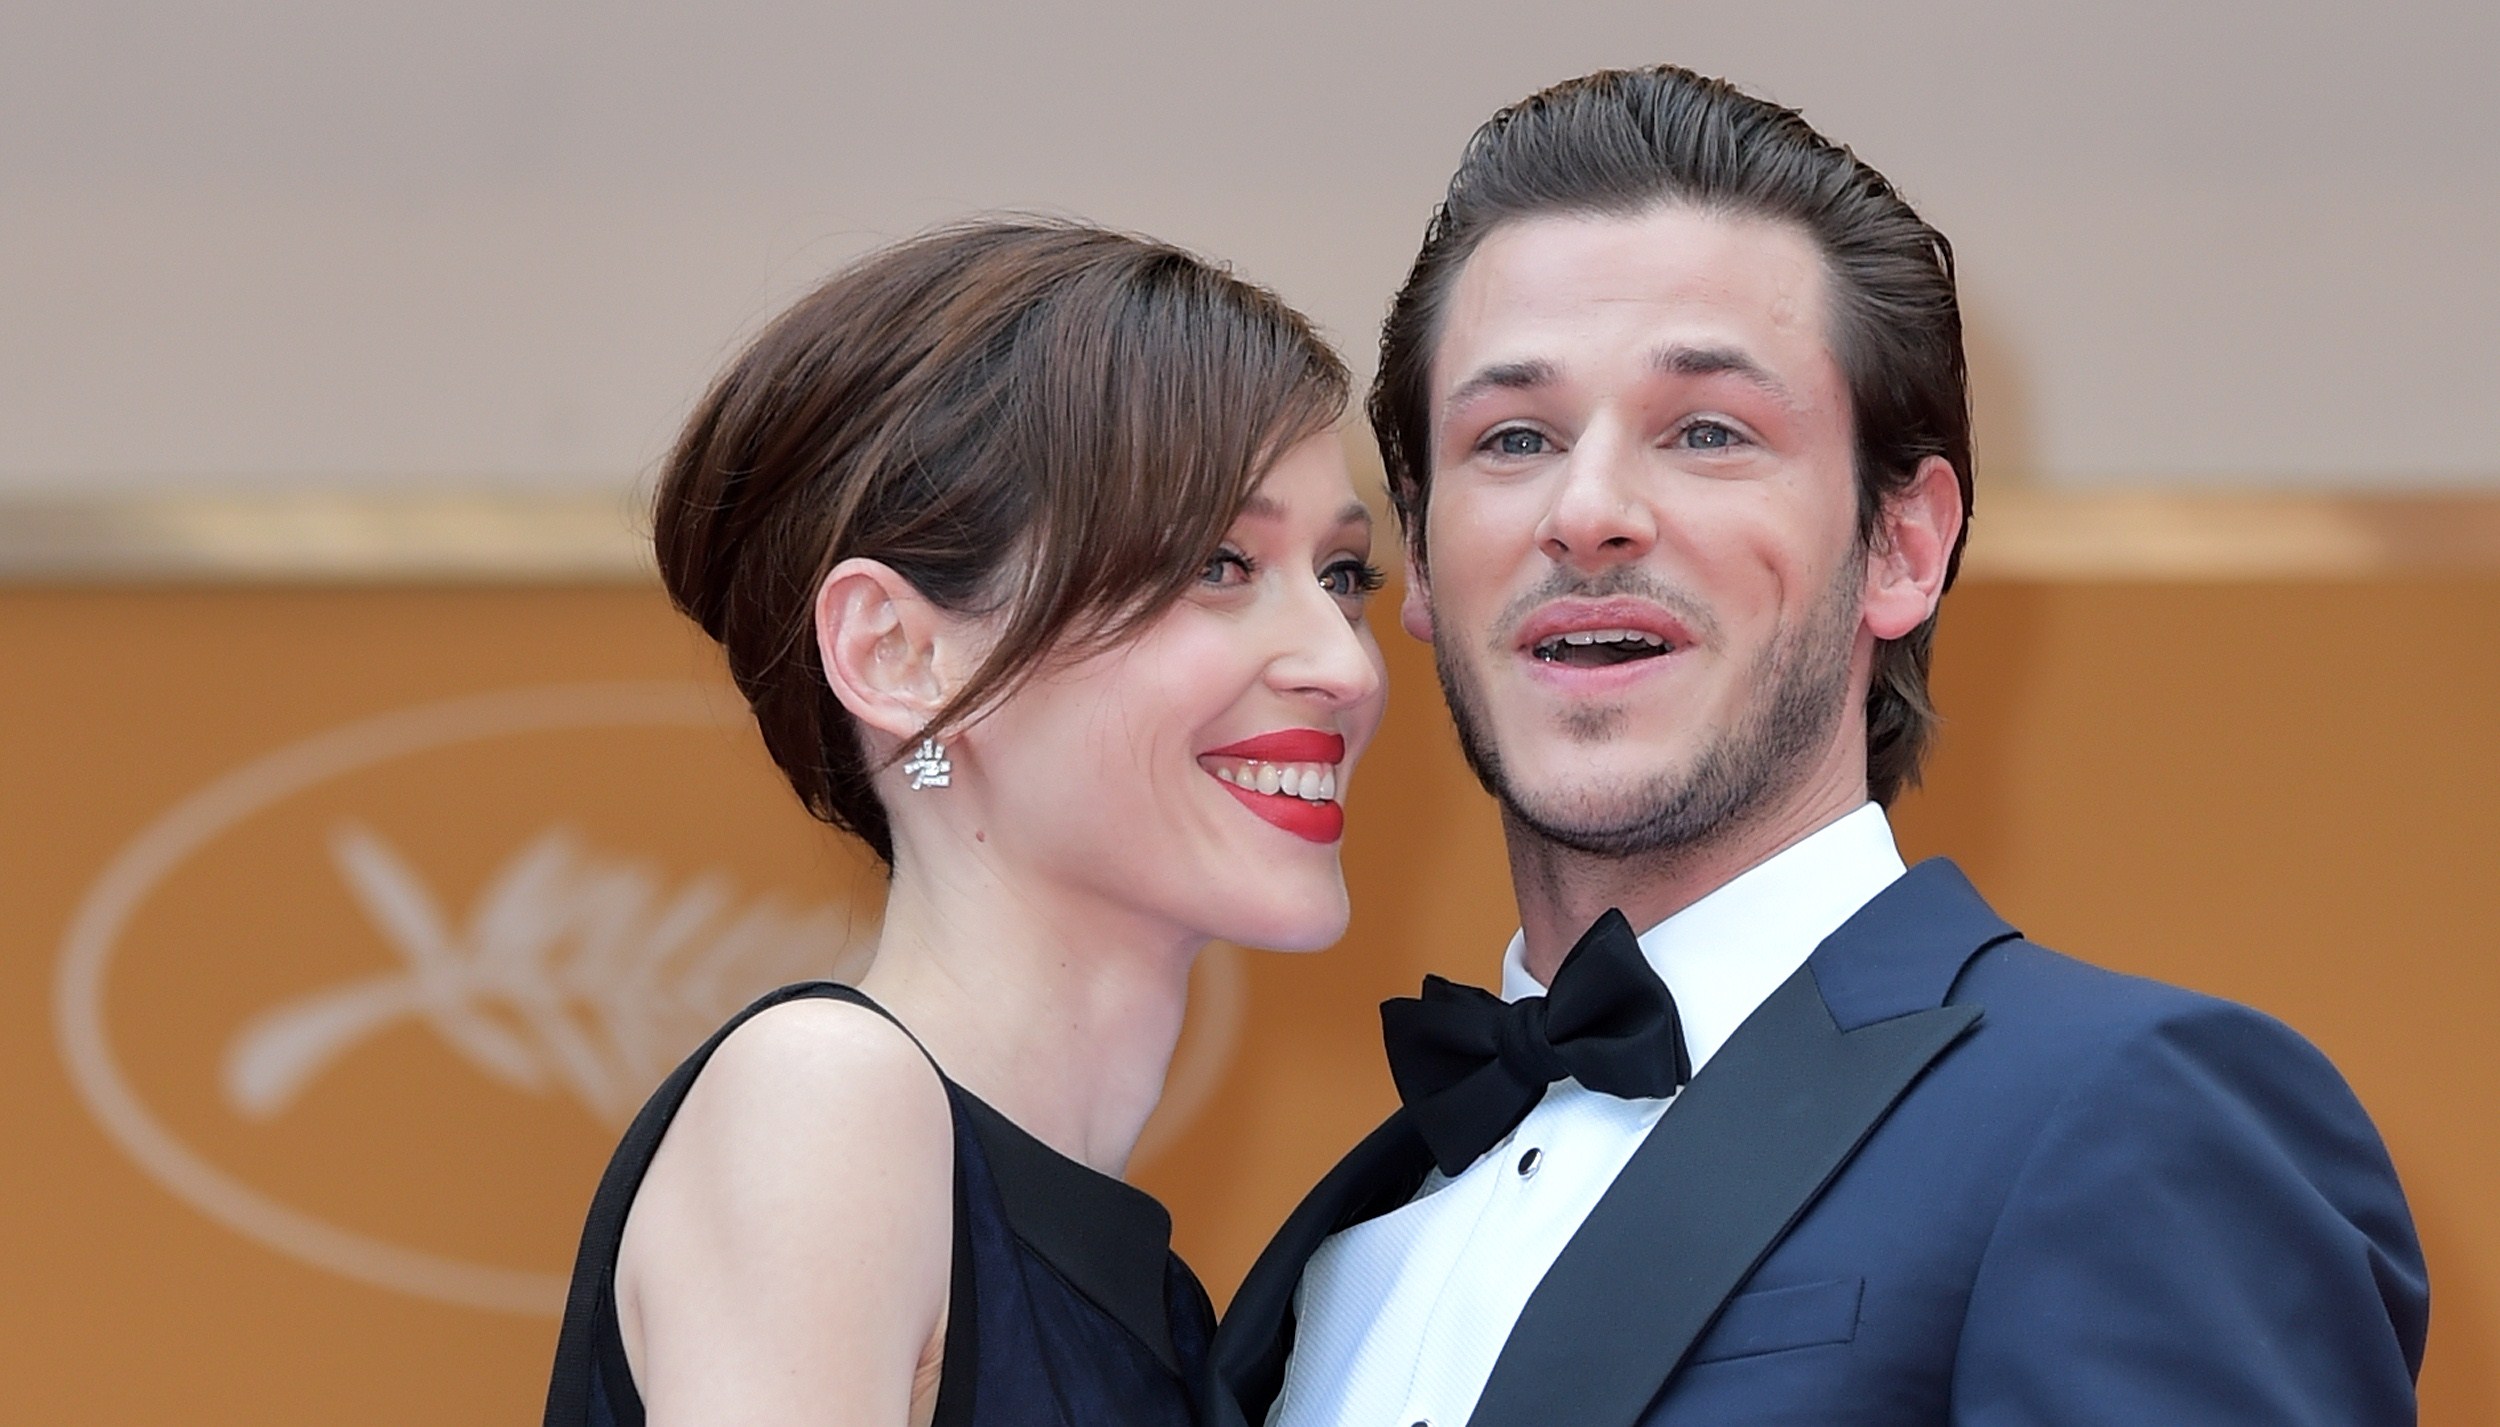 Gaspard Ulliel and his partner Gaelle Pietri at the 67th edition of the Cannes Film Festival in Cannes, southern France, on May 17, 2014. | Source: Getty Images